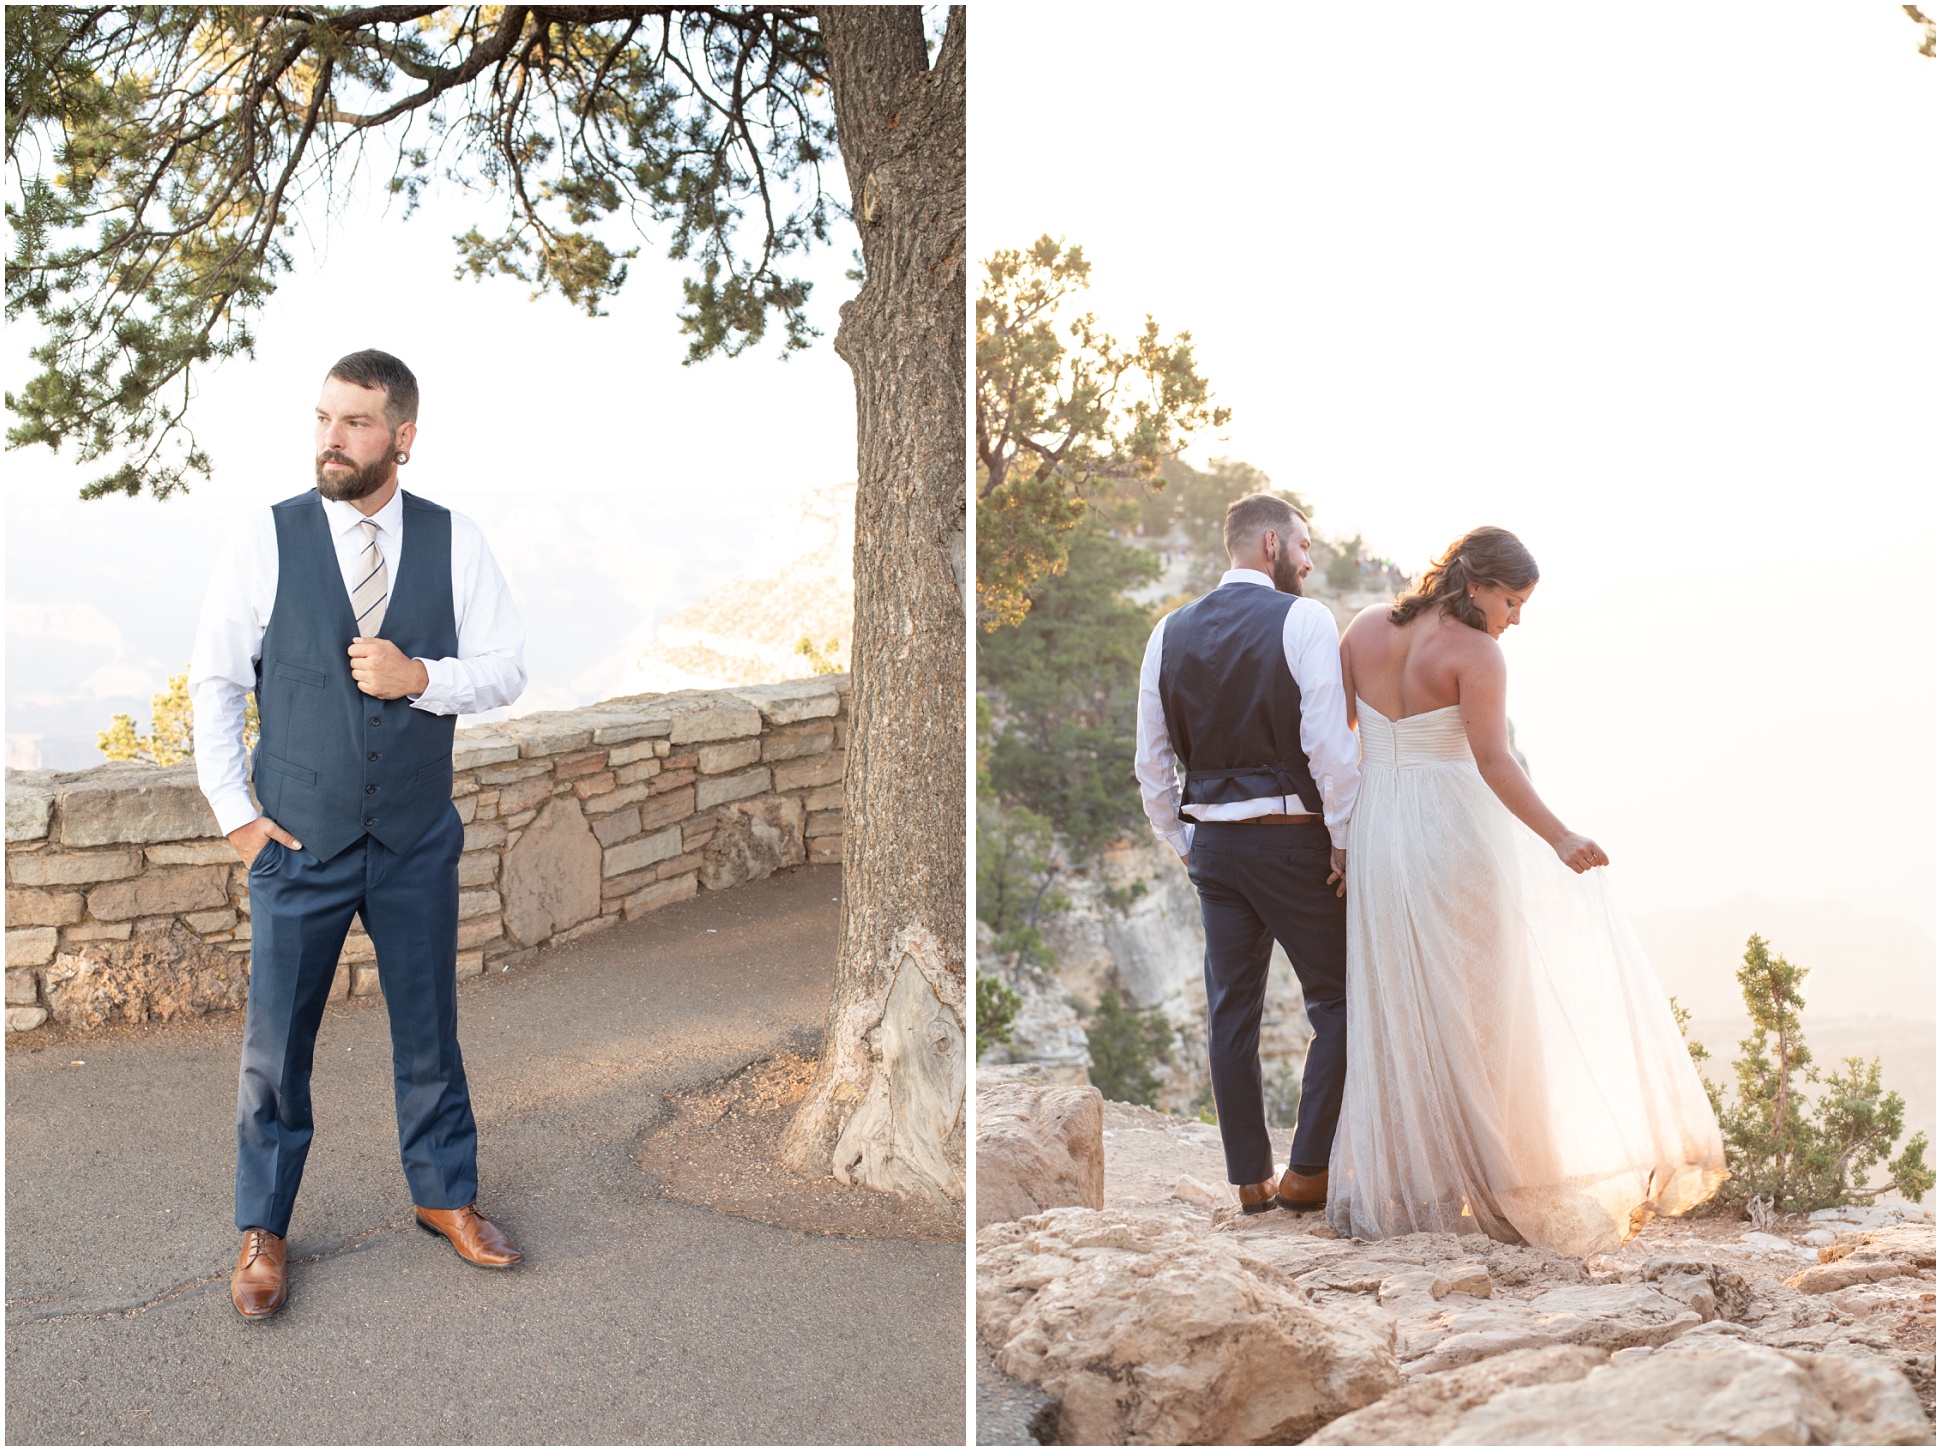 Sunset Wedding Portraits at the Grand Canyon